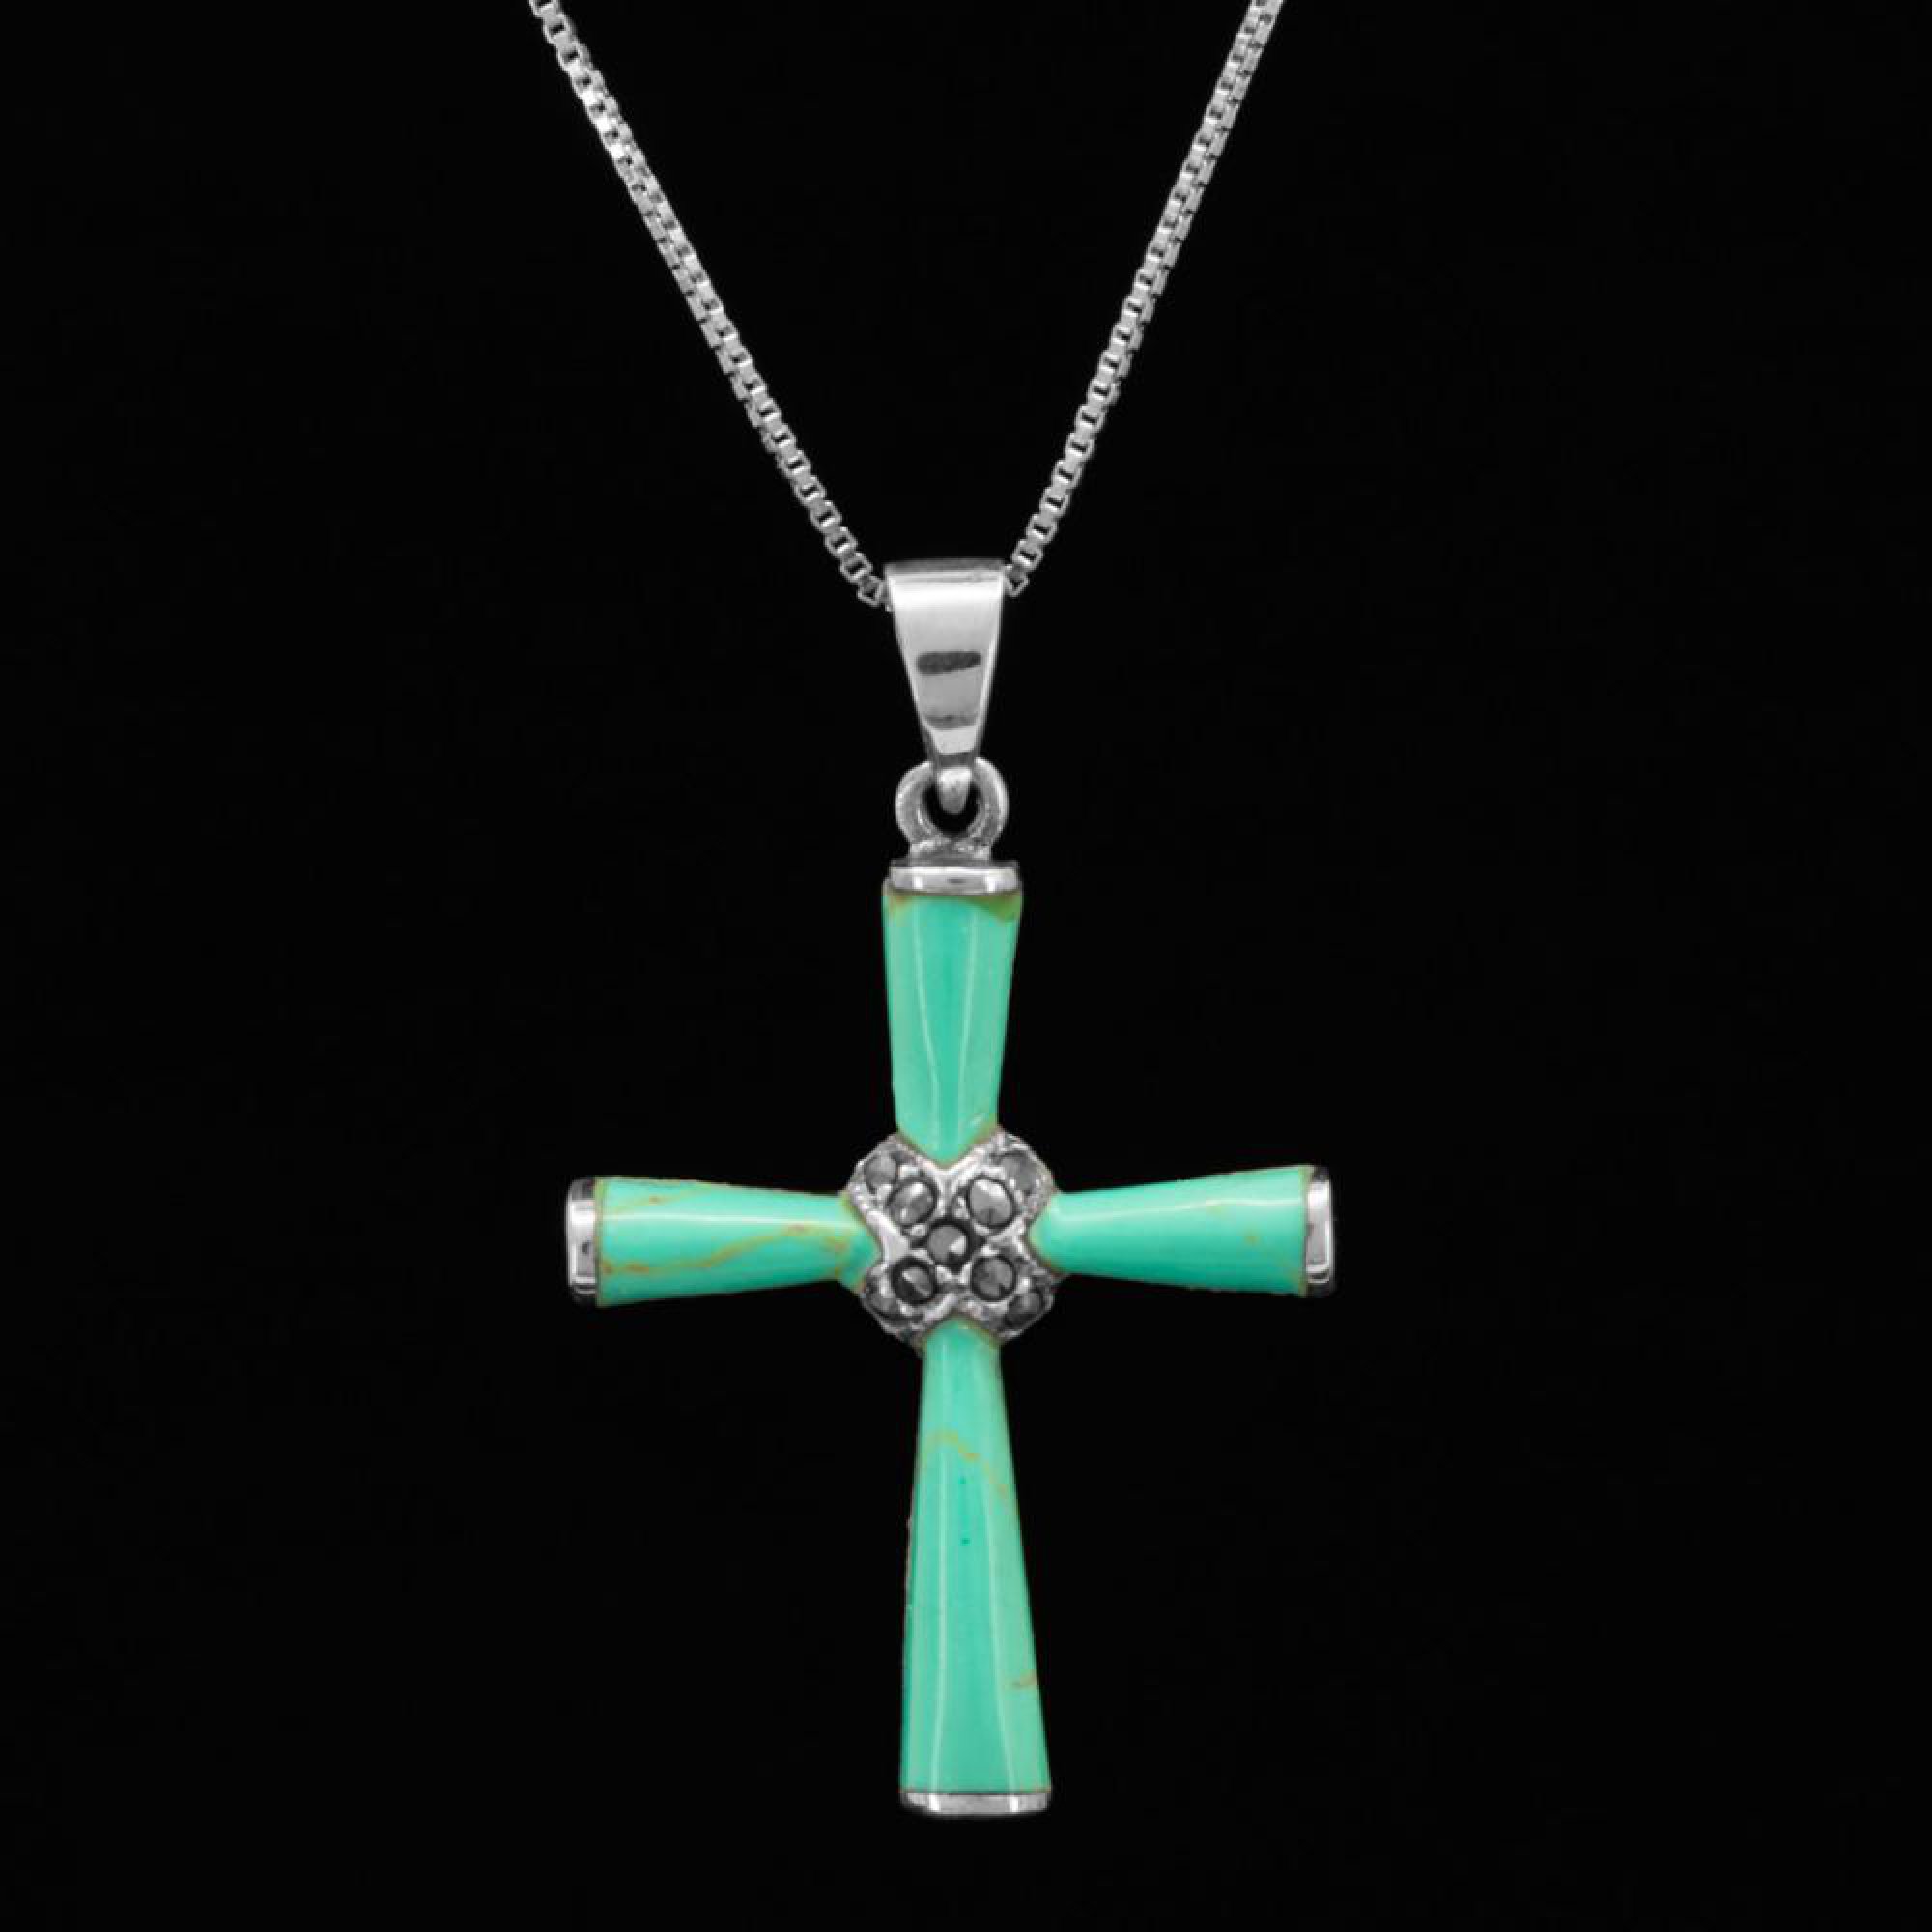 Silver cross with turquoise stones and marcasites